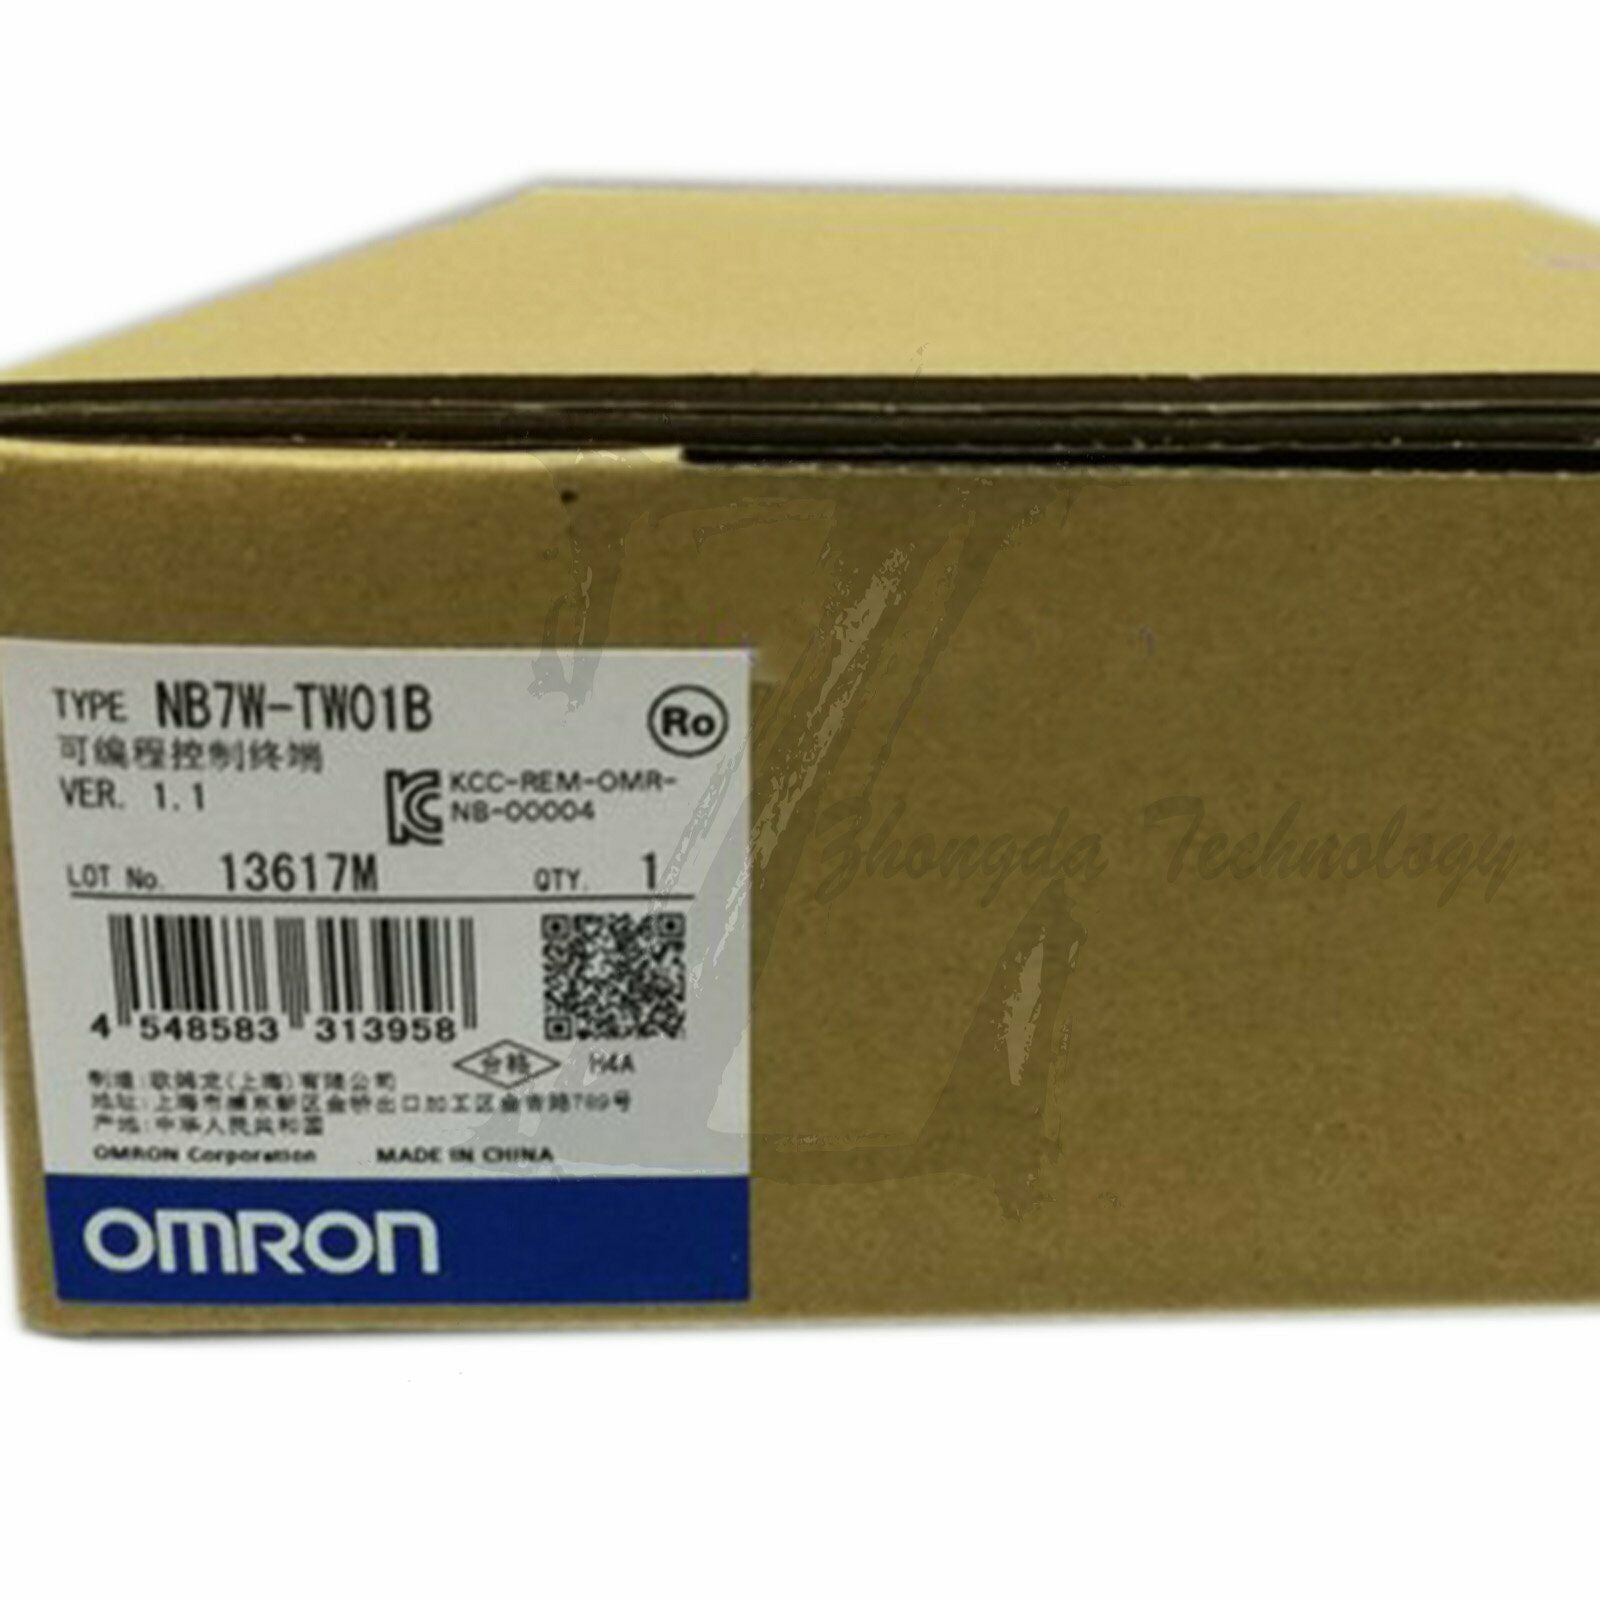 1Pc new Omron touch screen NB7W-TW01B one year warranty KOEED 201-500, 80%, import_2020_10_10_031751, Omron, Other